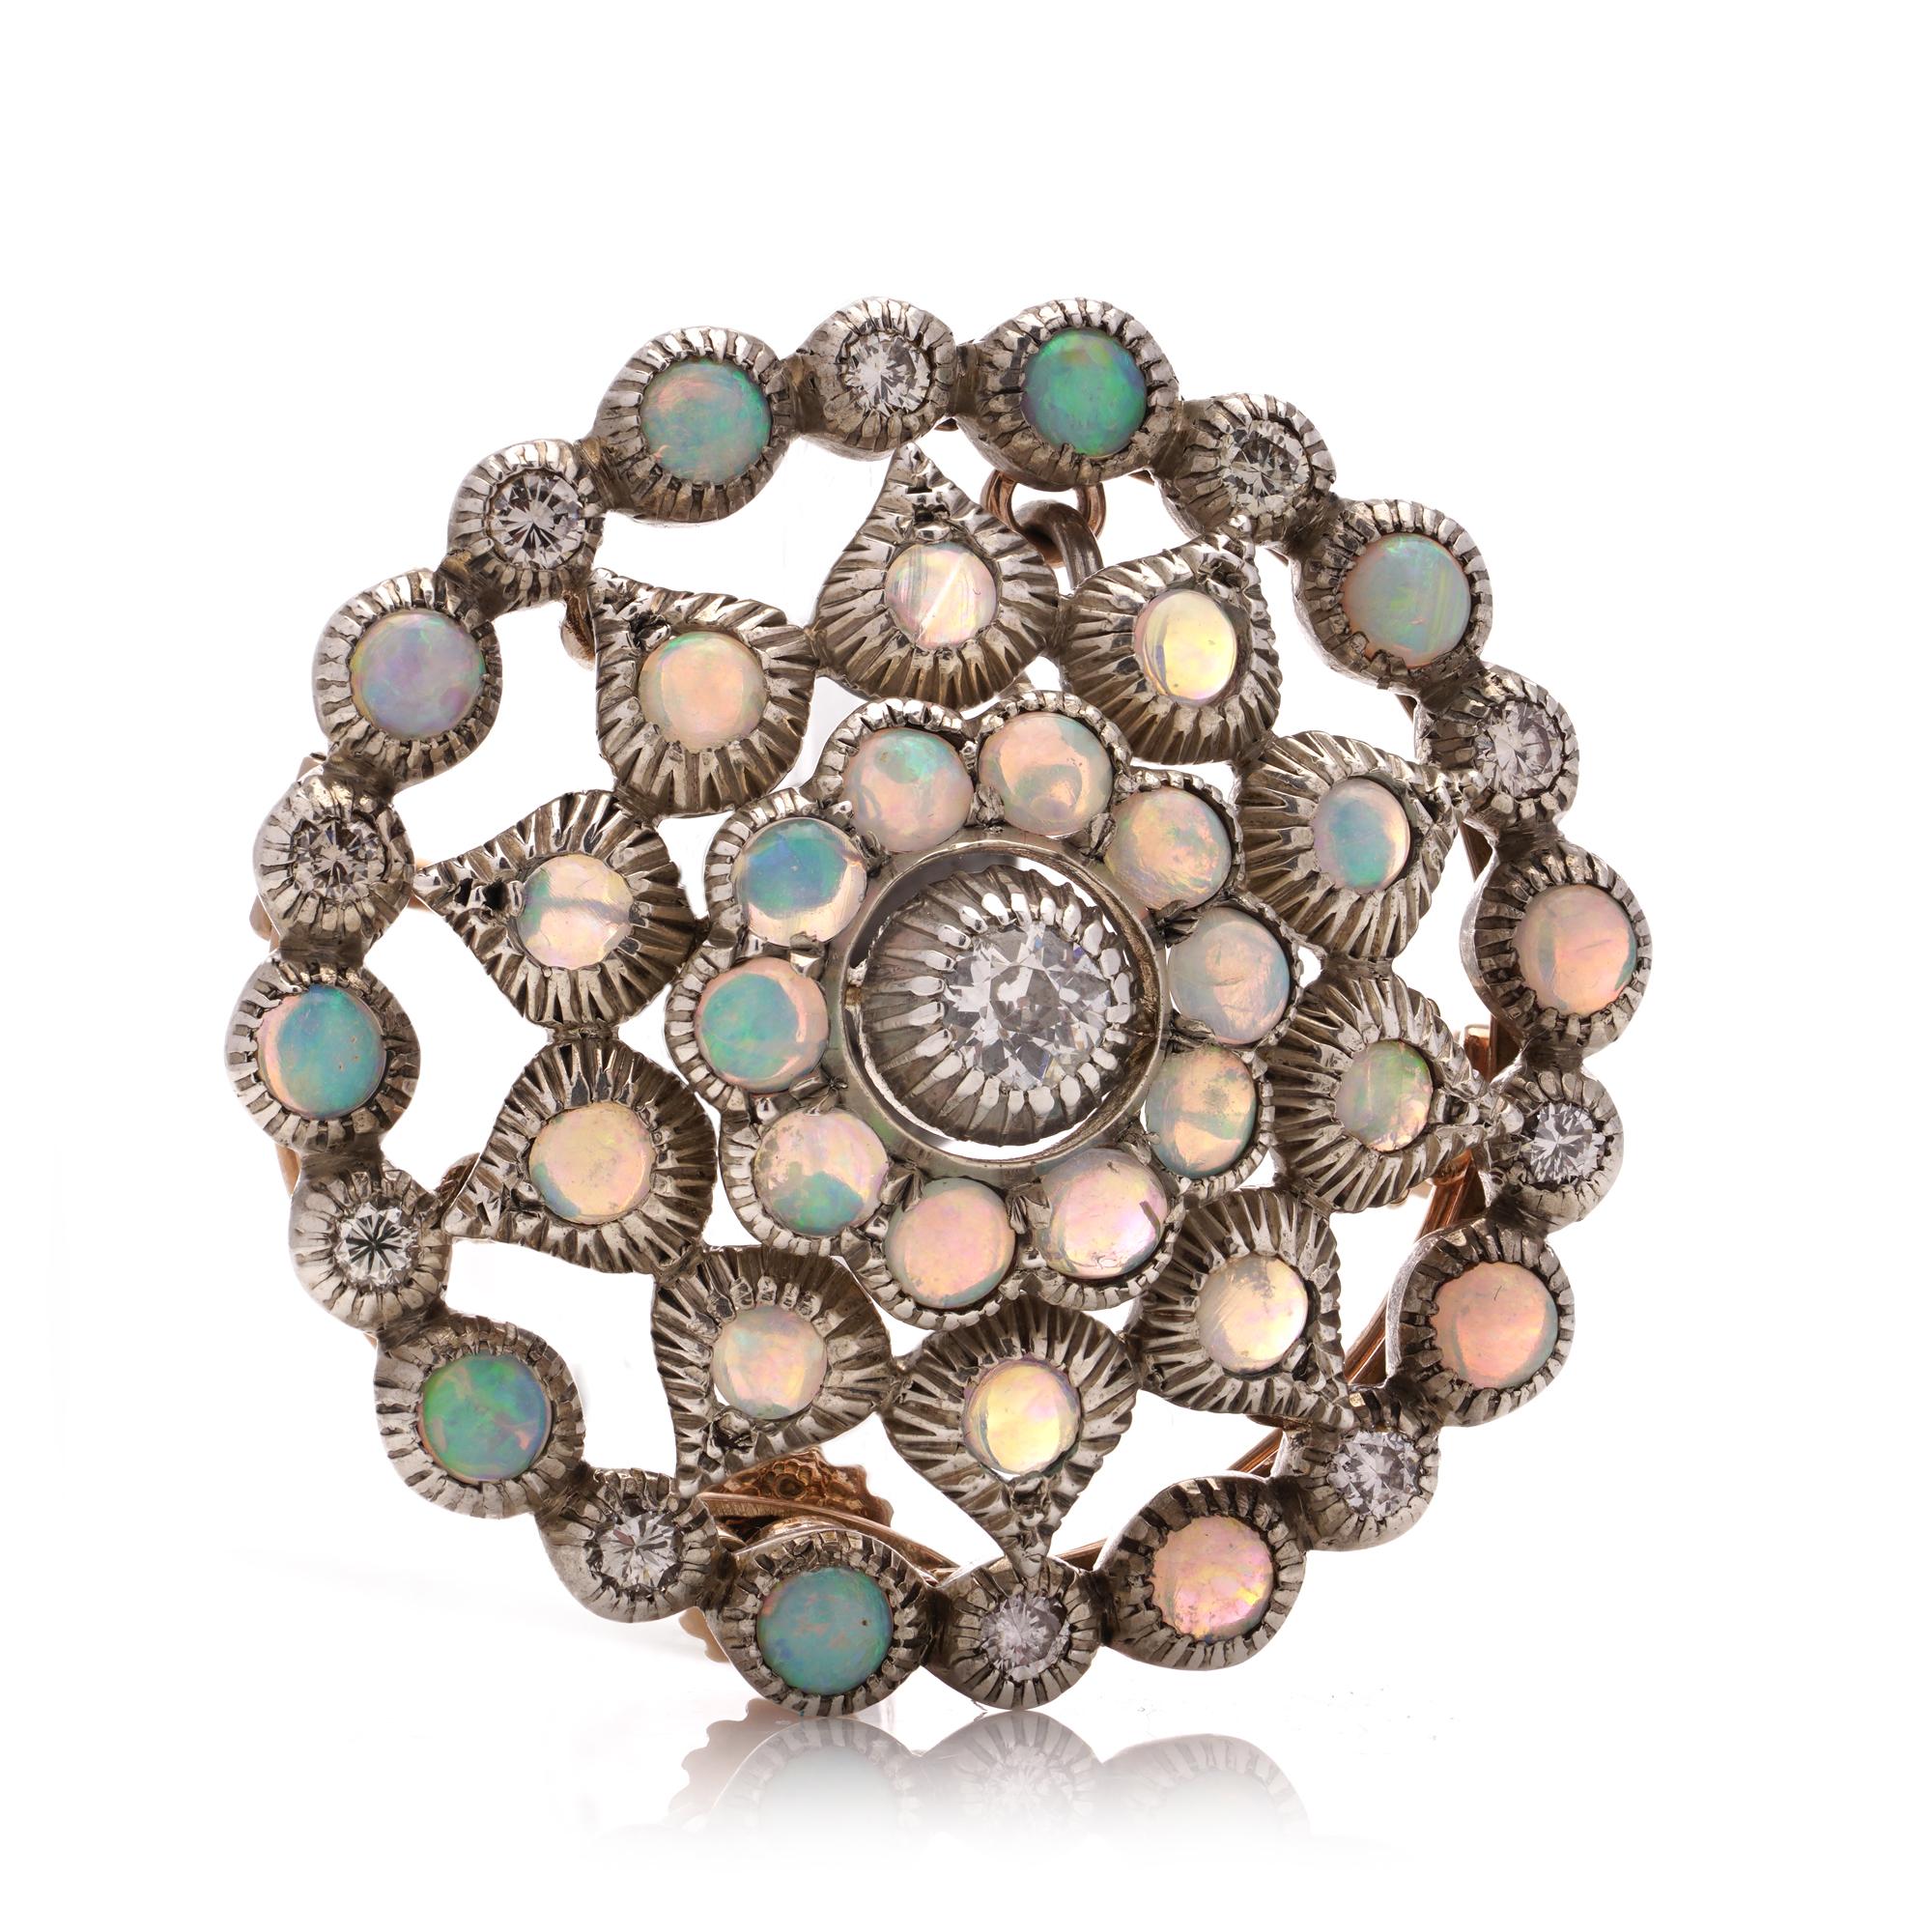 Antique Edwardian 9kt rose gold and silver round Opal and diamond brooch/pendant.
Tested positive for 9kt gold and silver.
Made in England, Circa 1910

Dimensions -
Weight: 12.00 grams
Size: Diameter: 3.2 cm

Diamonds -
Cut: Old-European
Quantity of